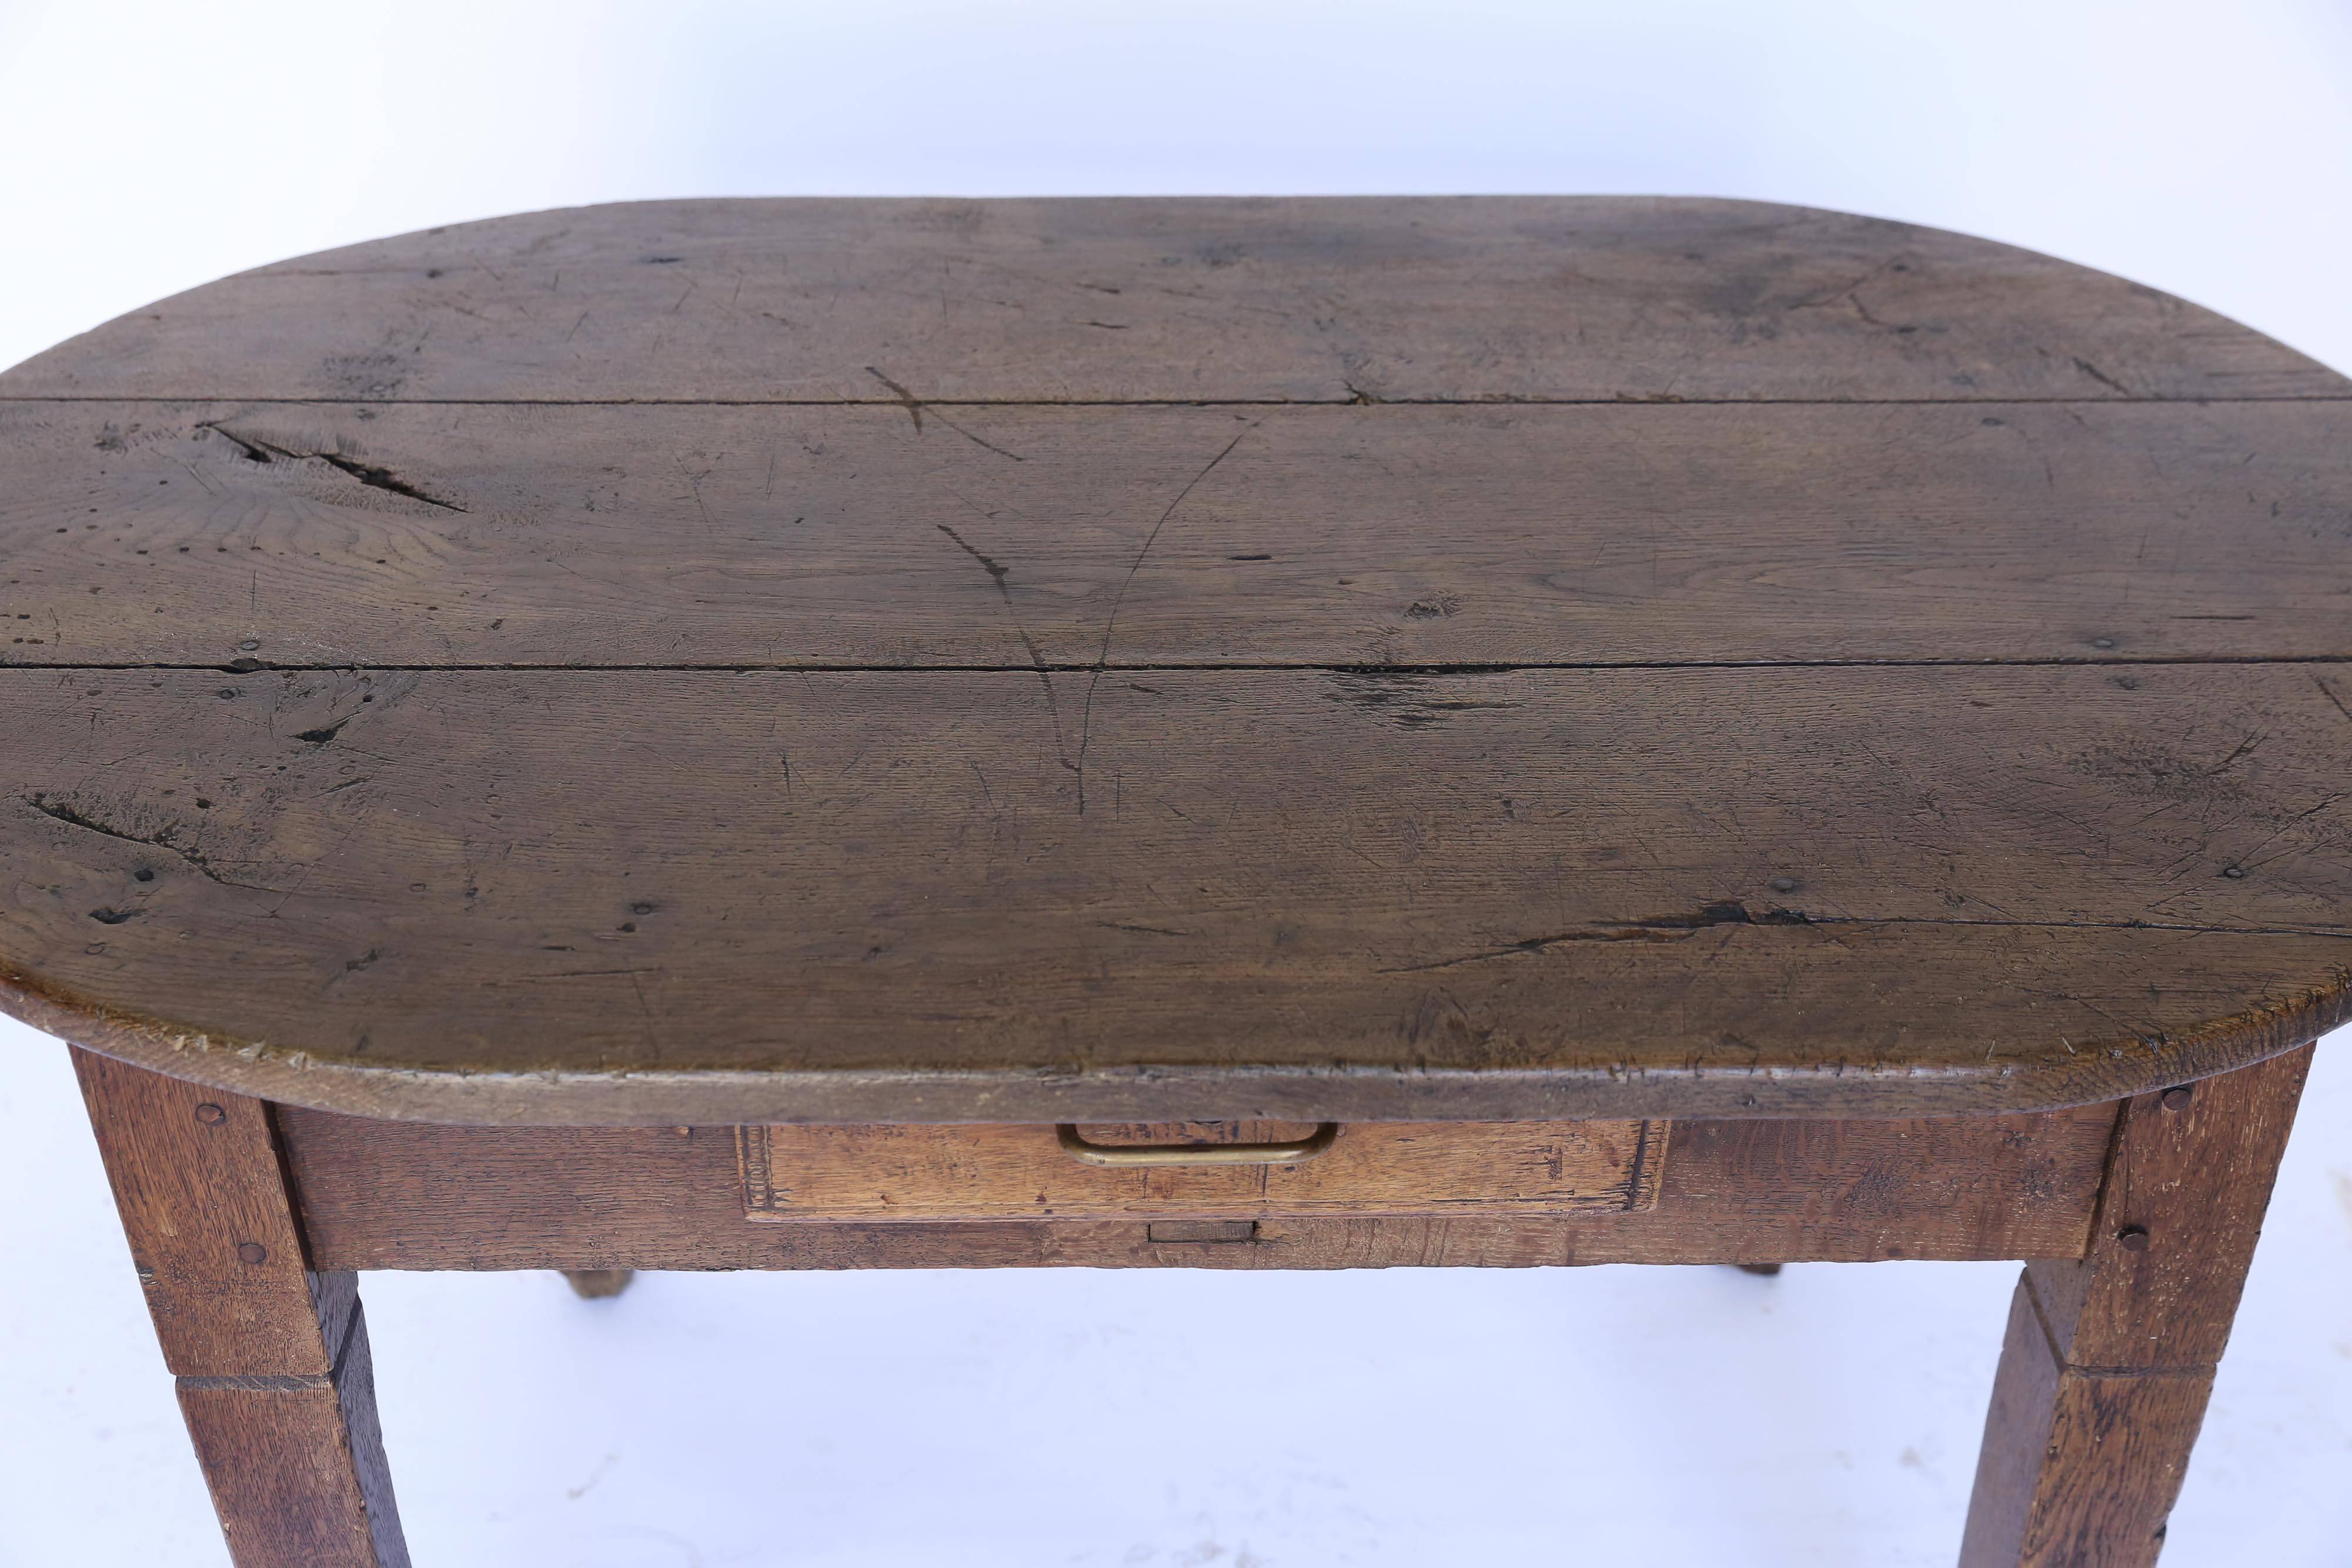 An oval table with one drawer from France, circa 1880. Beautifully handmade, it's all about the look and feel of the wood which has a lovely patina and interesting surface anomalies. The single drawer has a simple wire pull. A delightful piece with